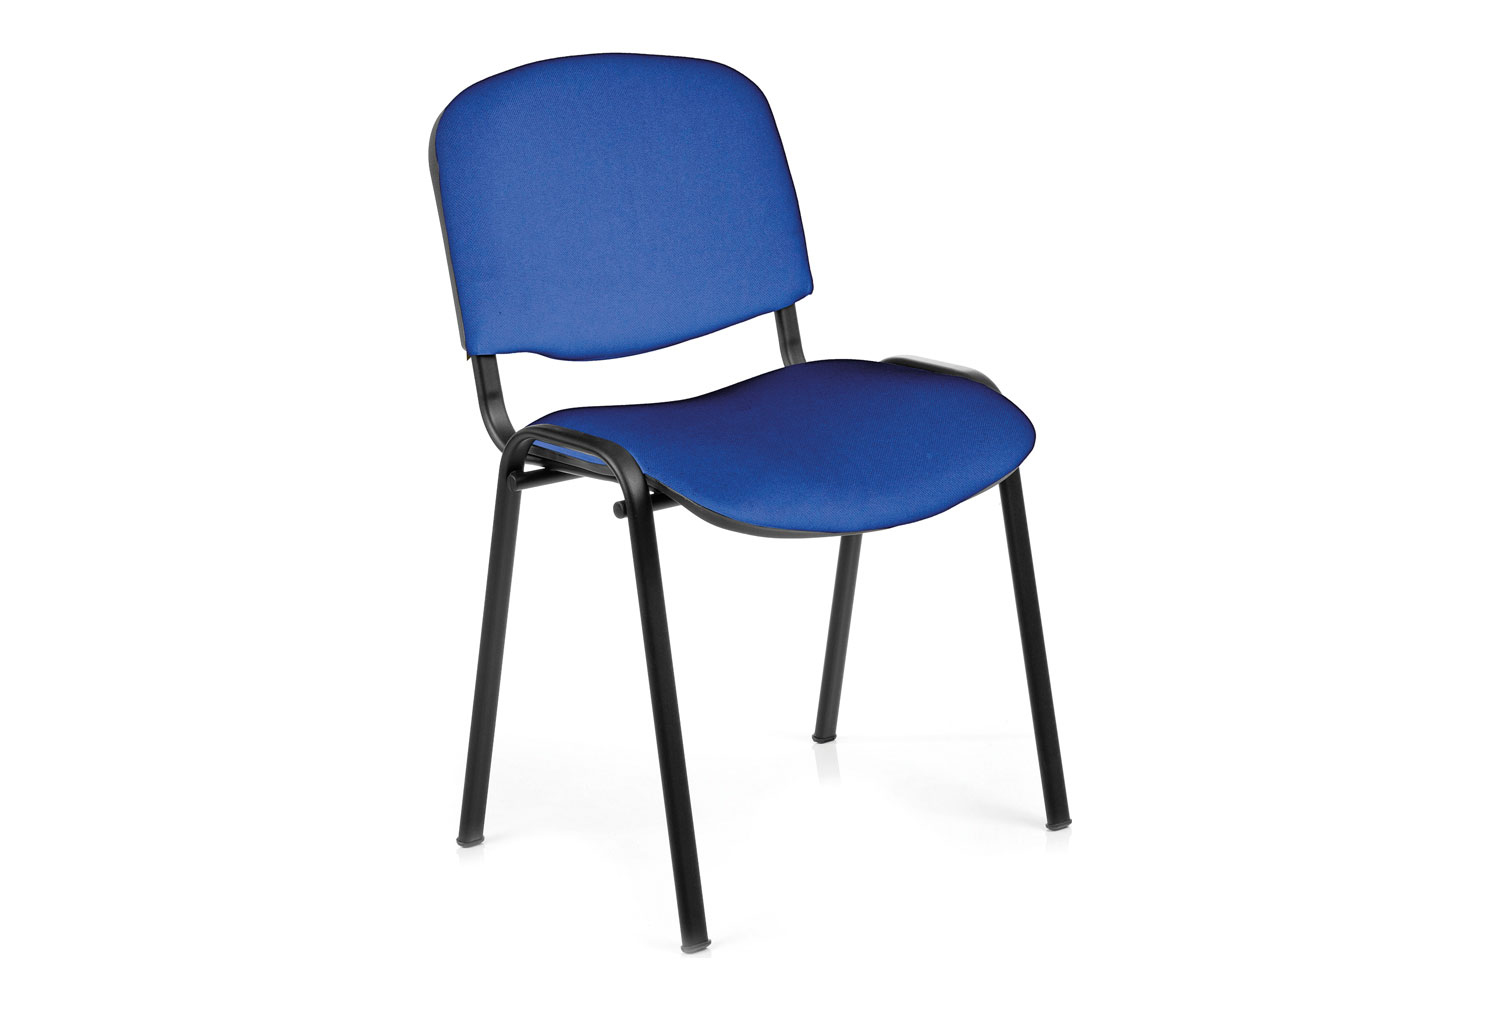 Qty 4 - Vogue Fabric ISO Black Framed Stacking Conference Office Chair (Blue), Black Frame, Blue, Express Delivery